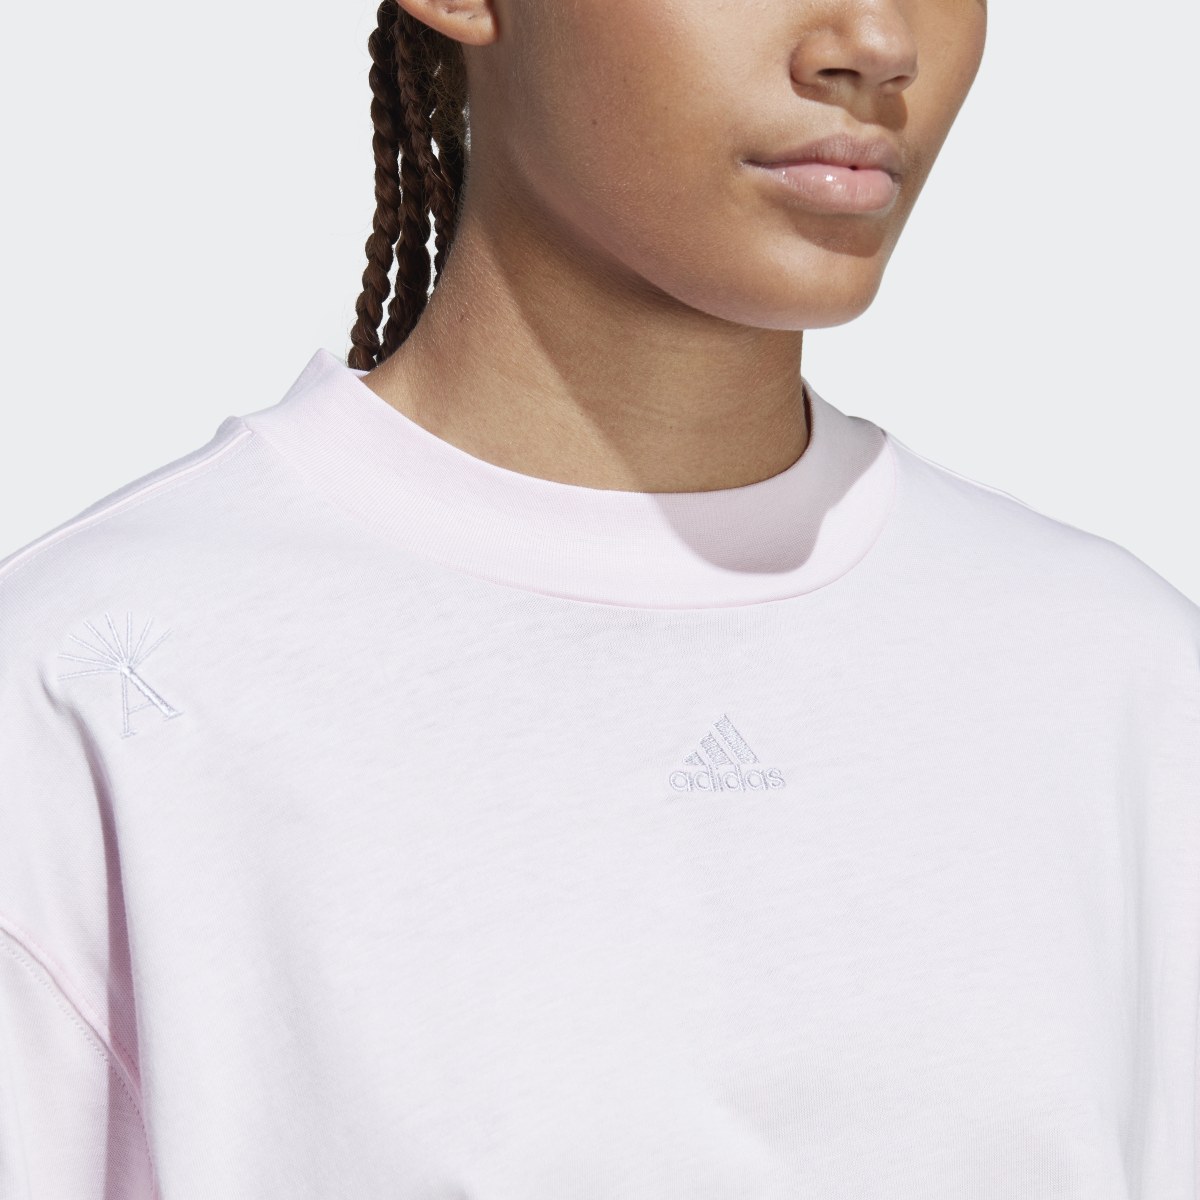 Adidas Boyfriend Tee with Healing Crystals Inspired Graphics. 6